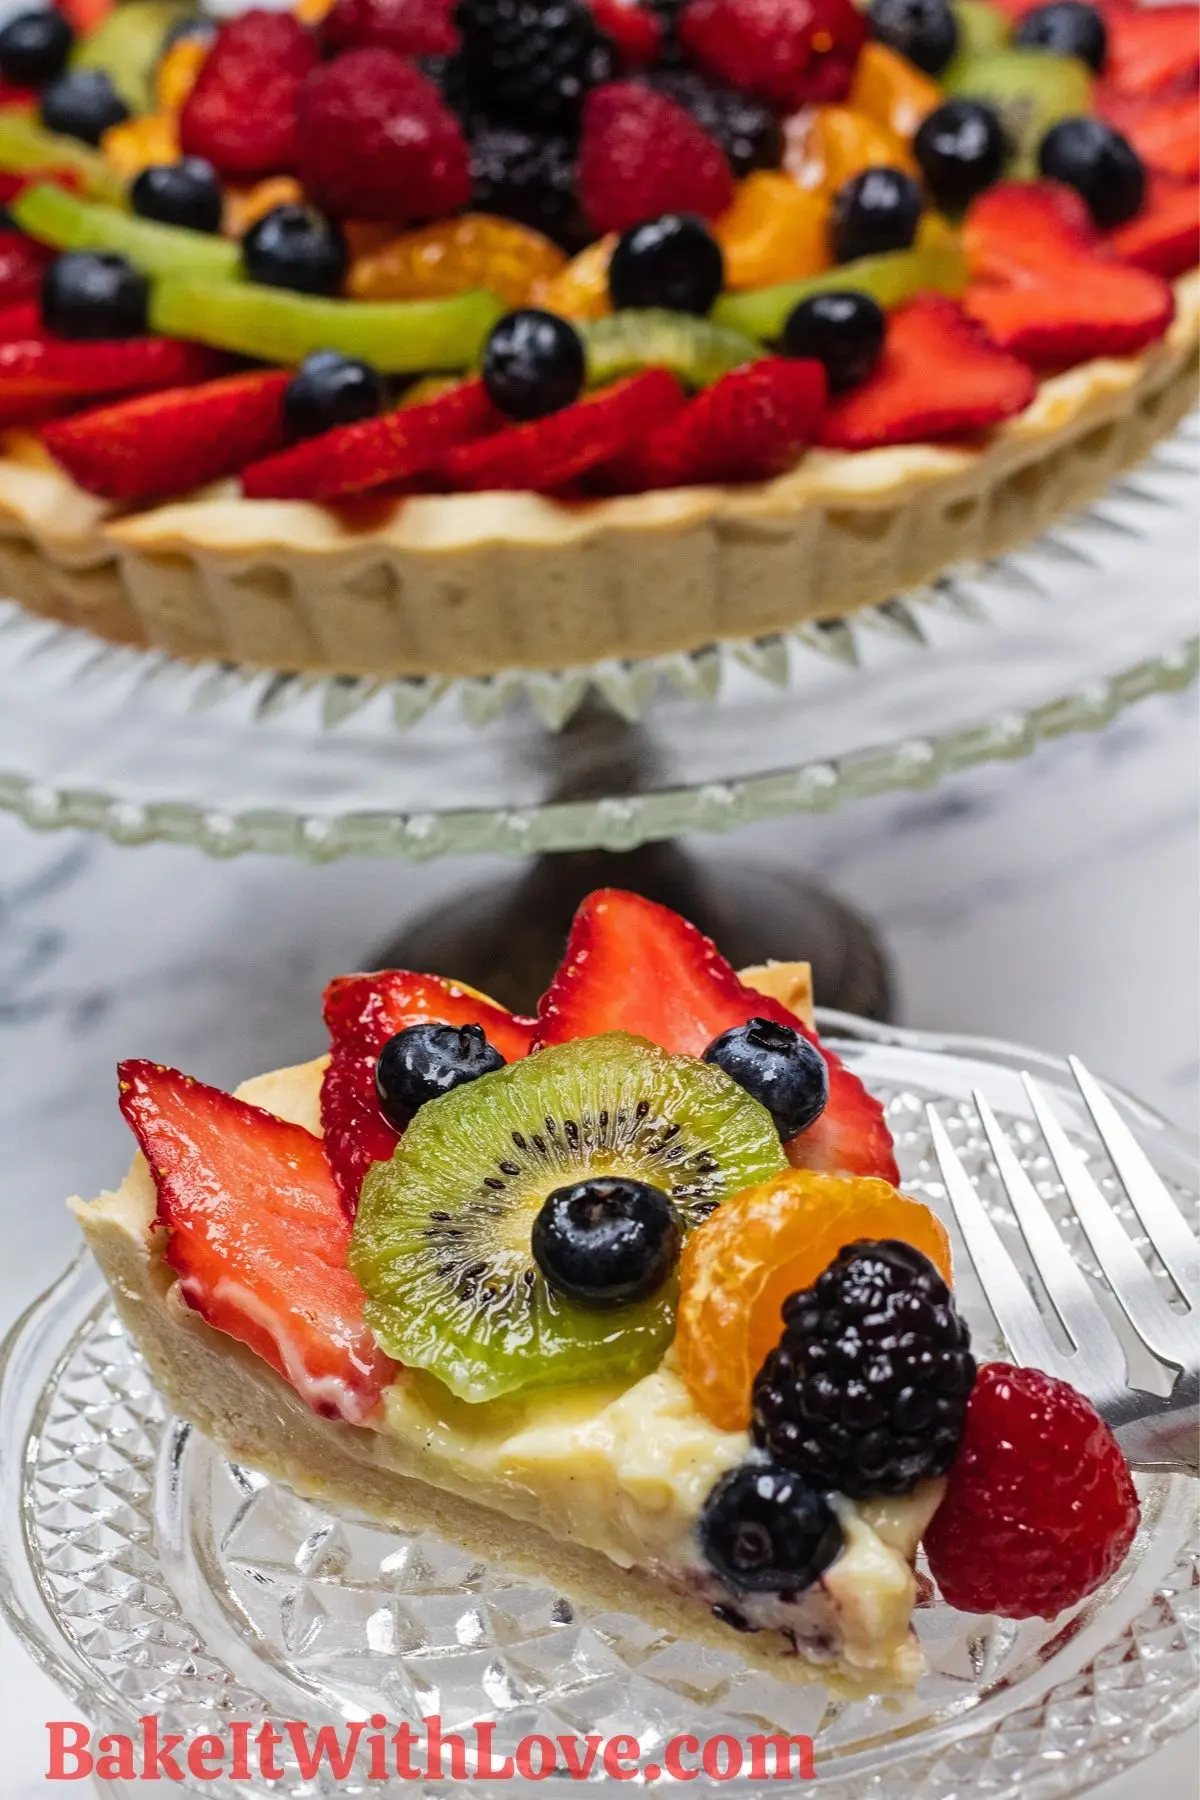 Tarte aux Fruits photo on glass plate of a slice.